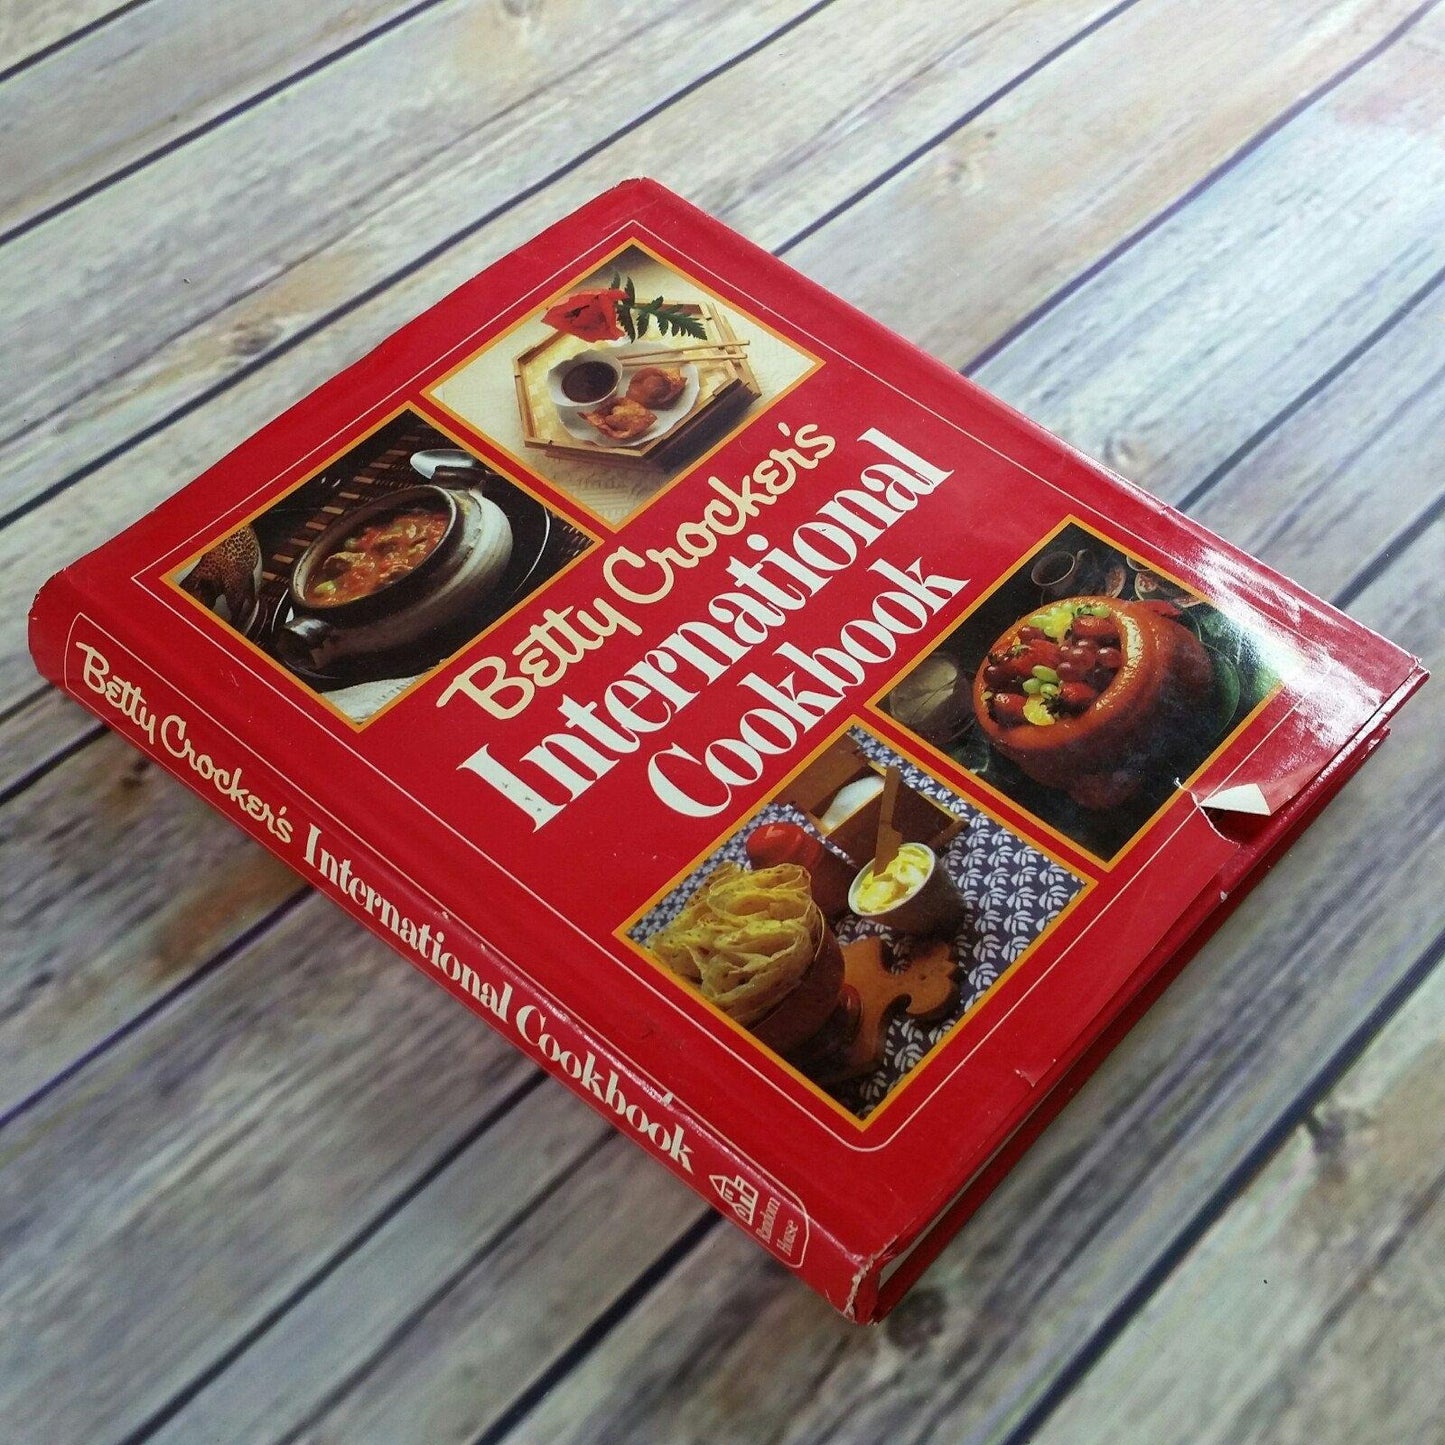 Vintage Cookbook Betty Crocker International Cookbook Recipes 1980 Hardcover Starters Seafood Poultry Meats First Edition